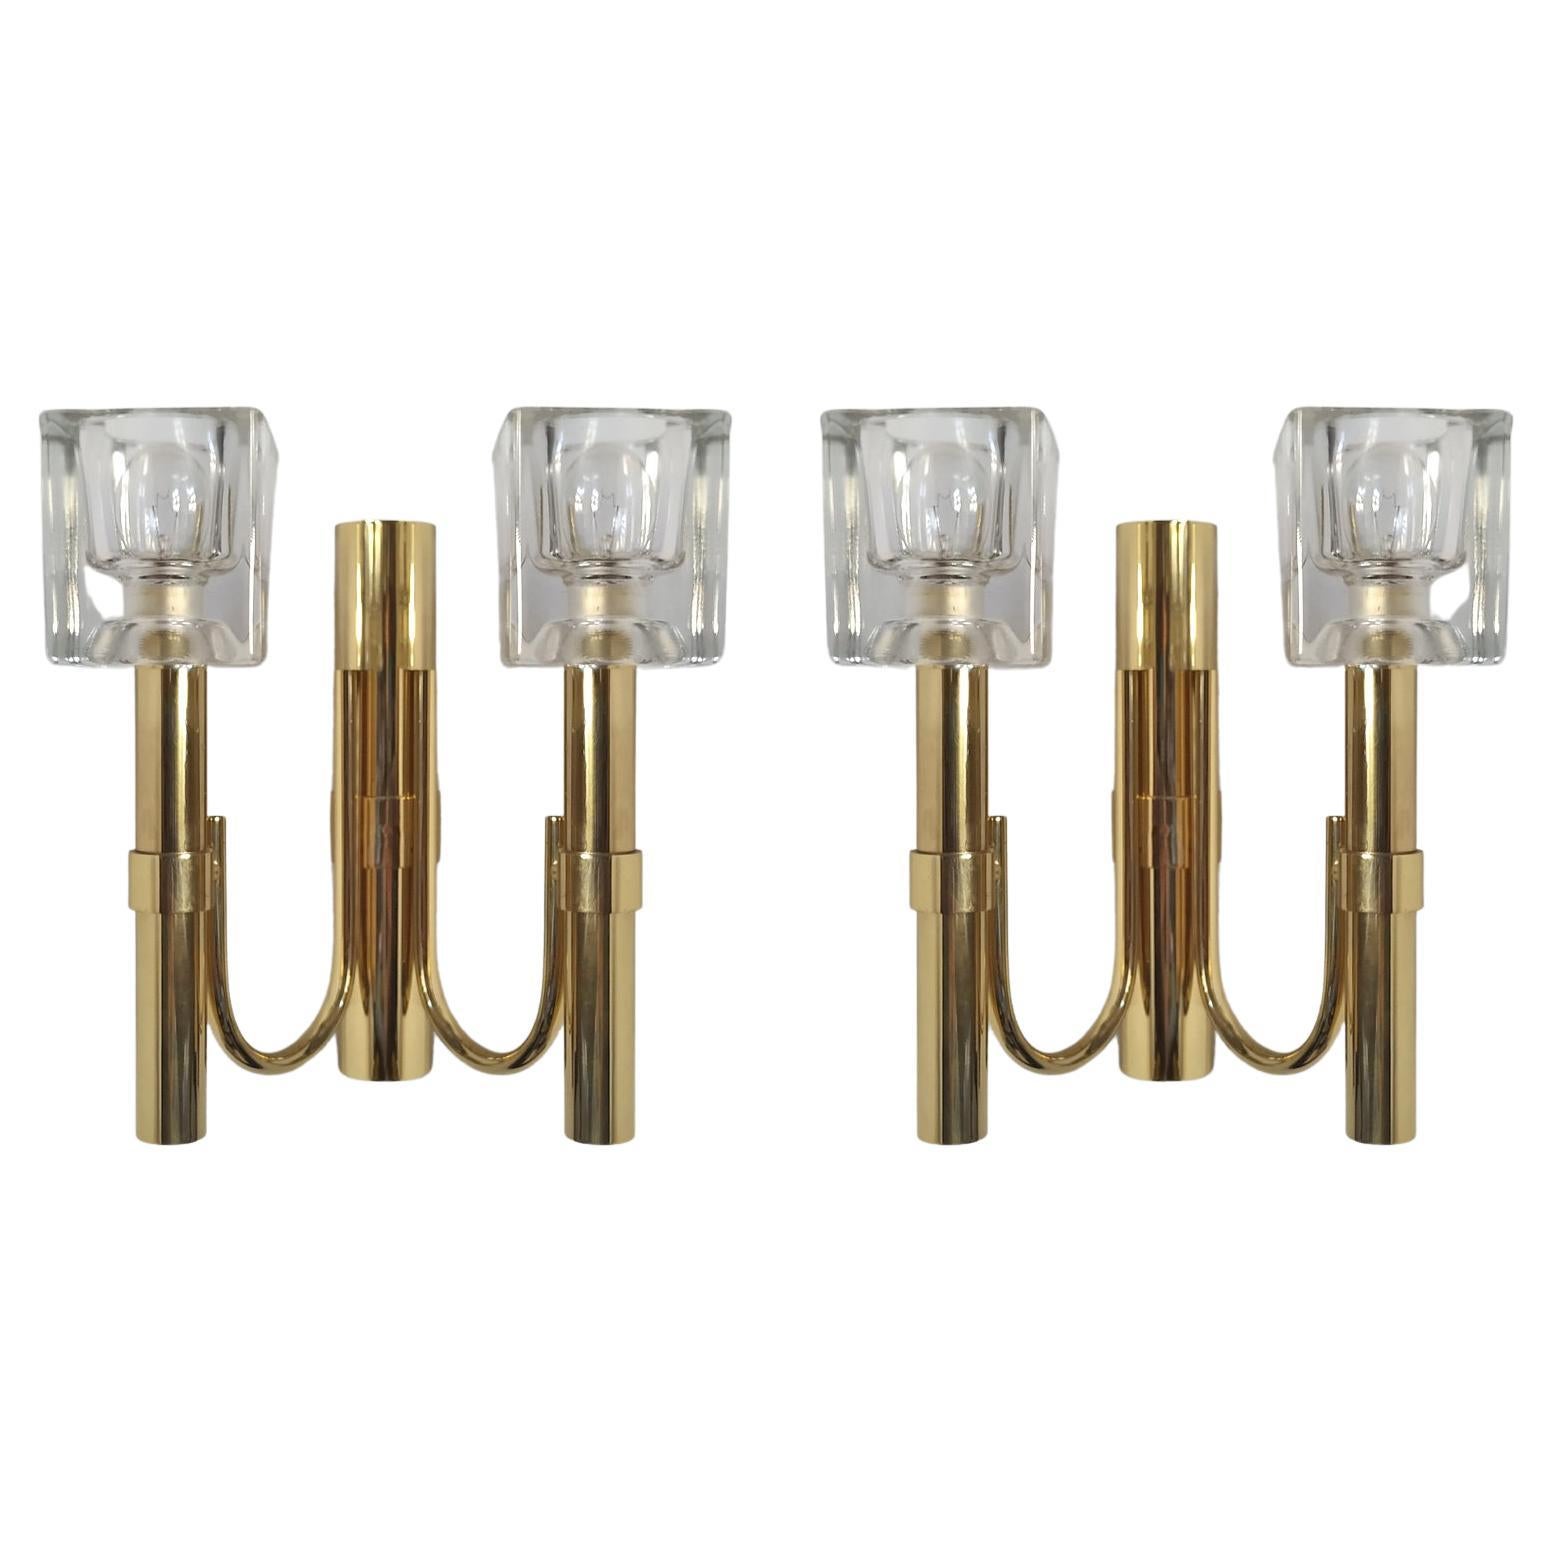 Pair of Italian Vintage Modernist Brass and Glass Sciolari Wall Lights Sconces For Sale